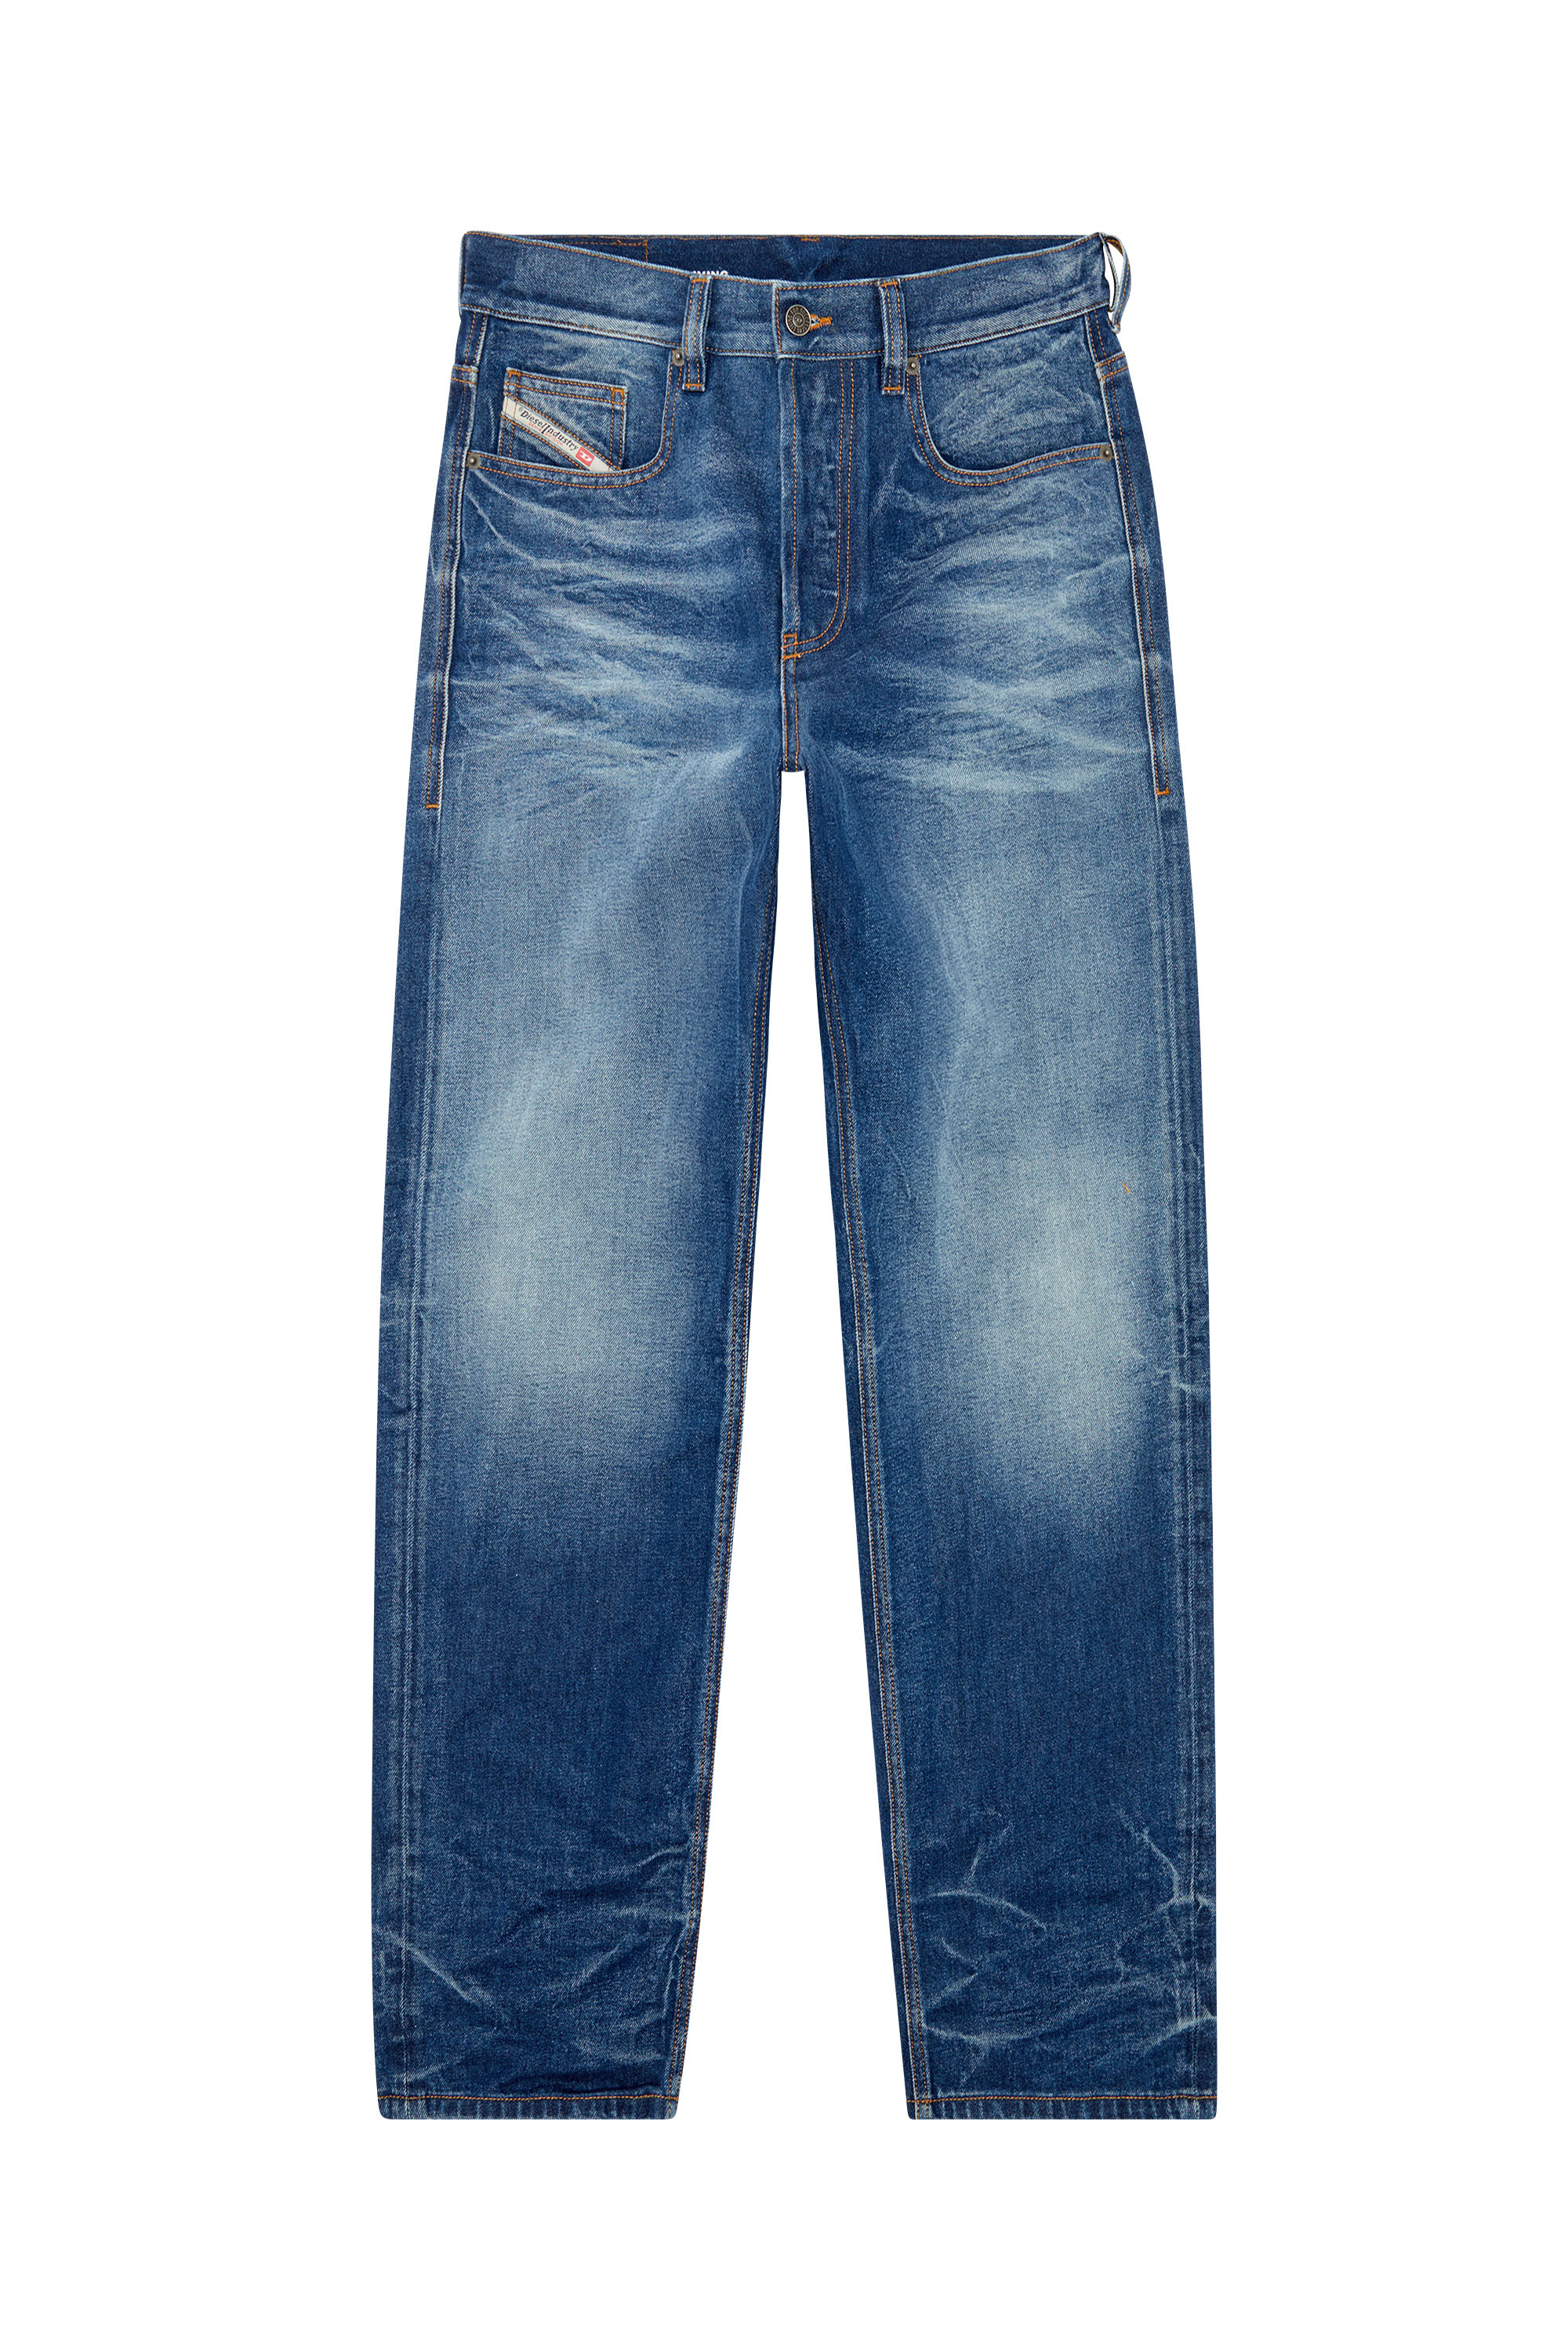 Diesel - Straight Jeans 2010 D-Macs 09I46, Hombre Straight Jeans - 2010 D-Macs in Azul marino - Image 5